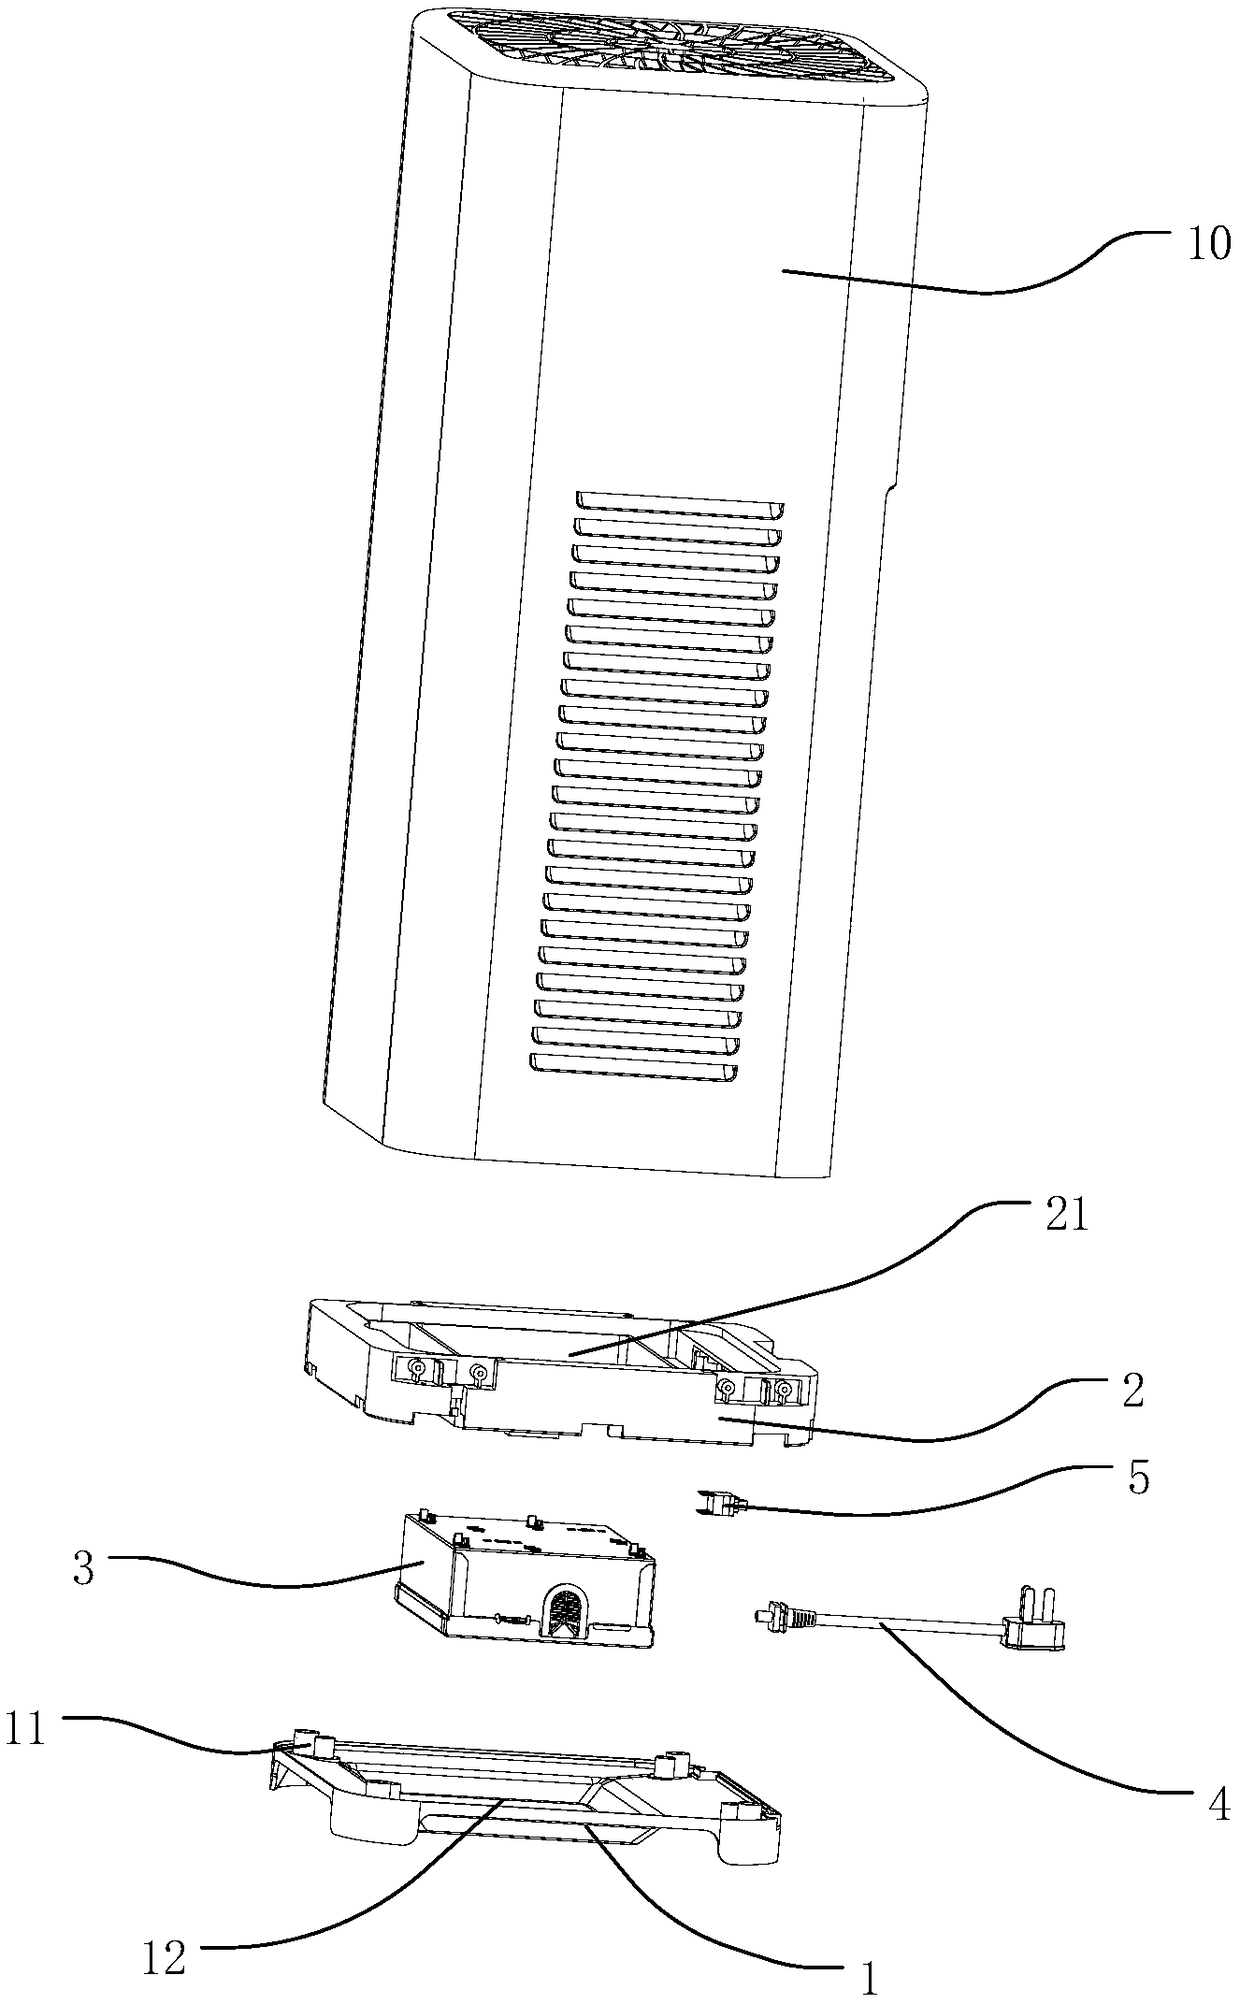 Base assembly of electric appliance and air purifier